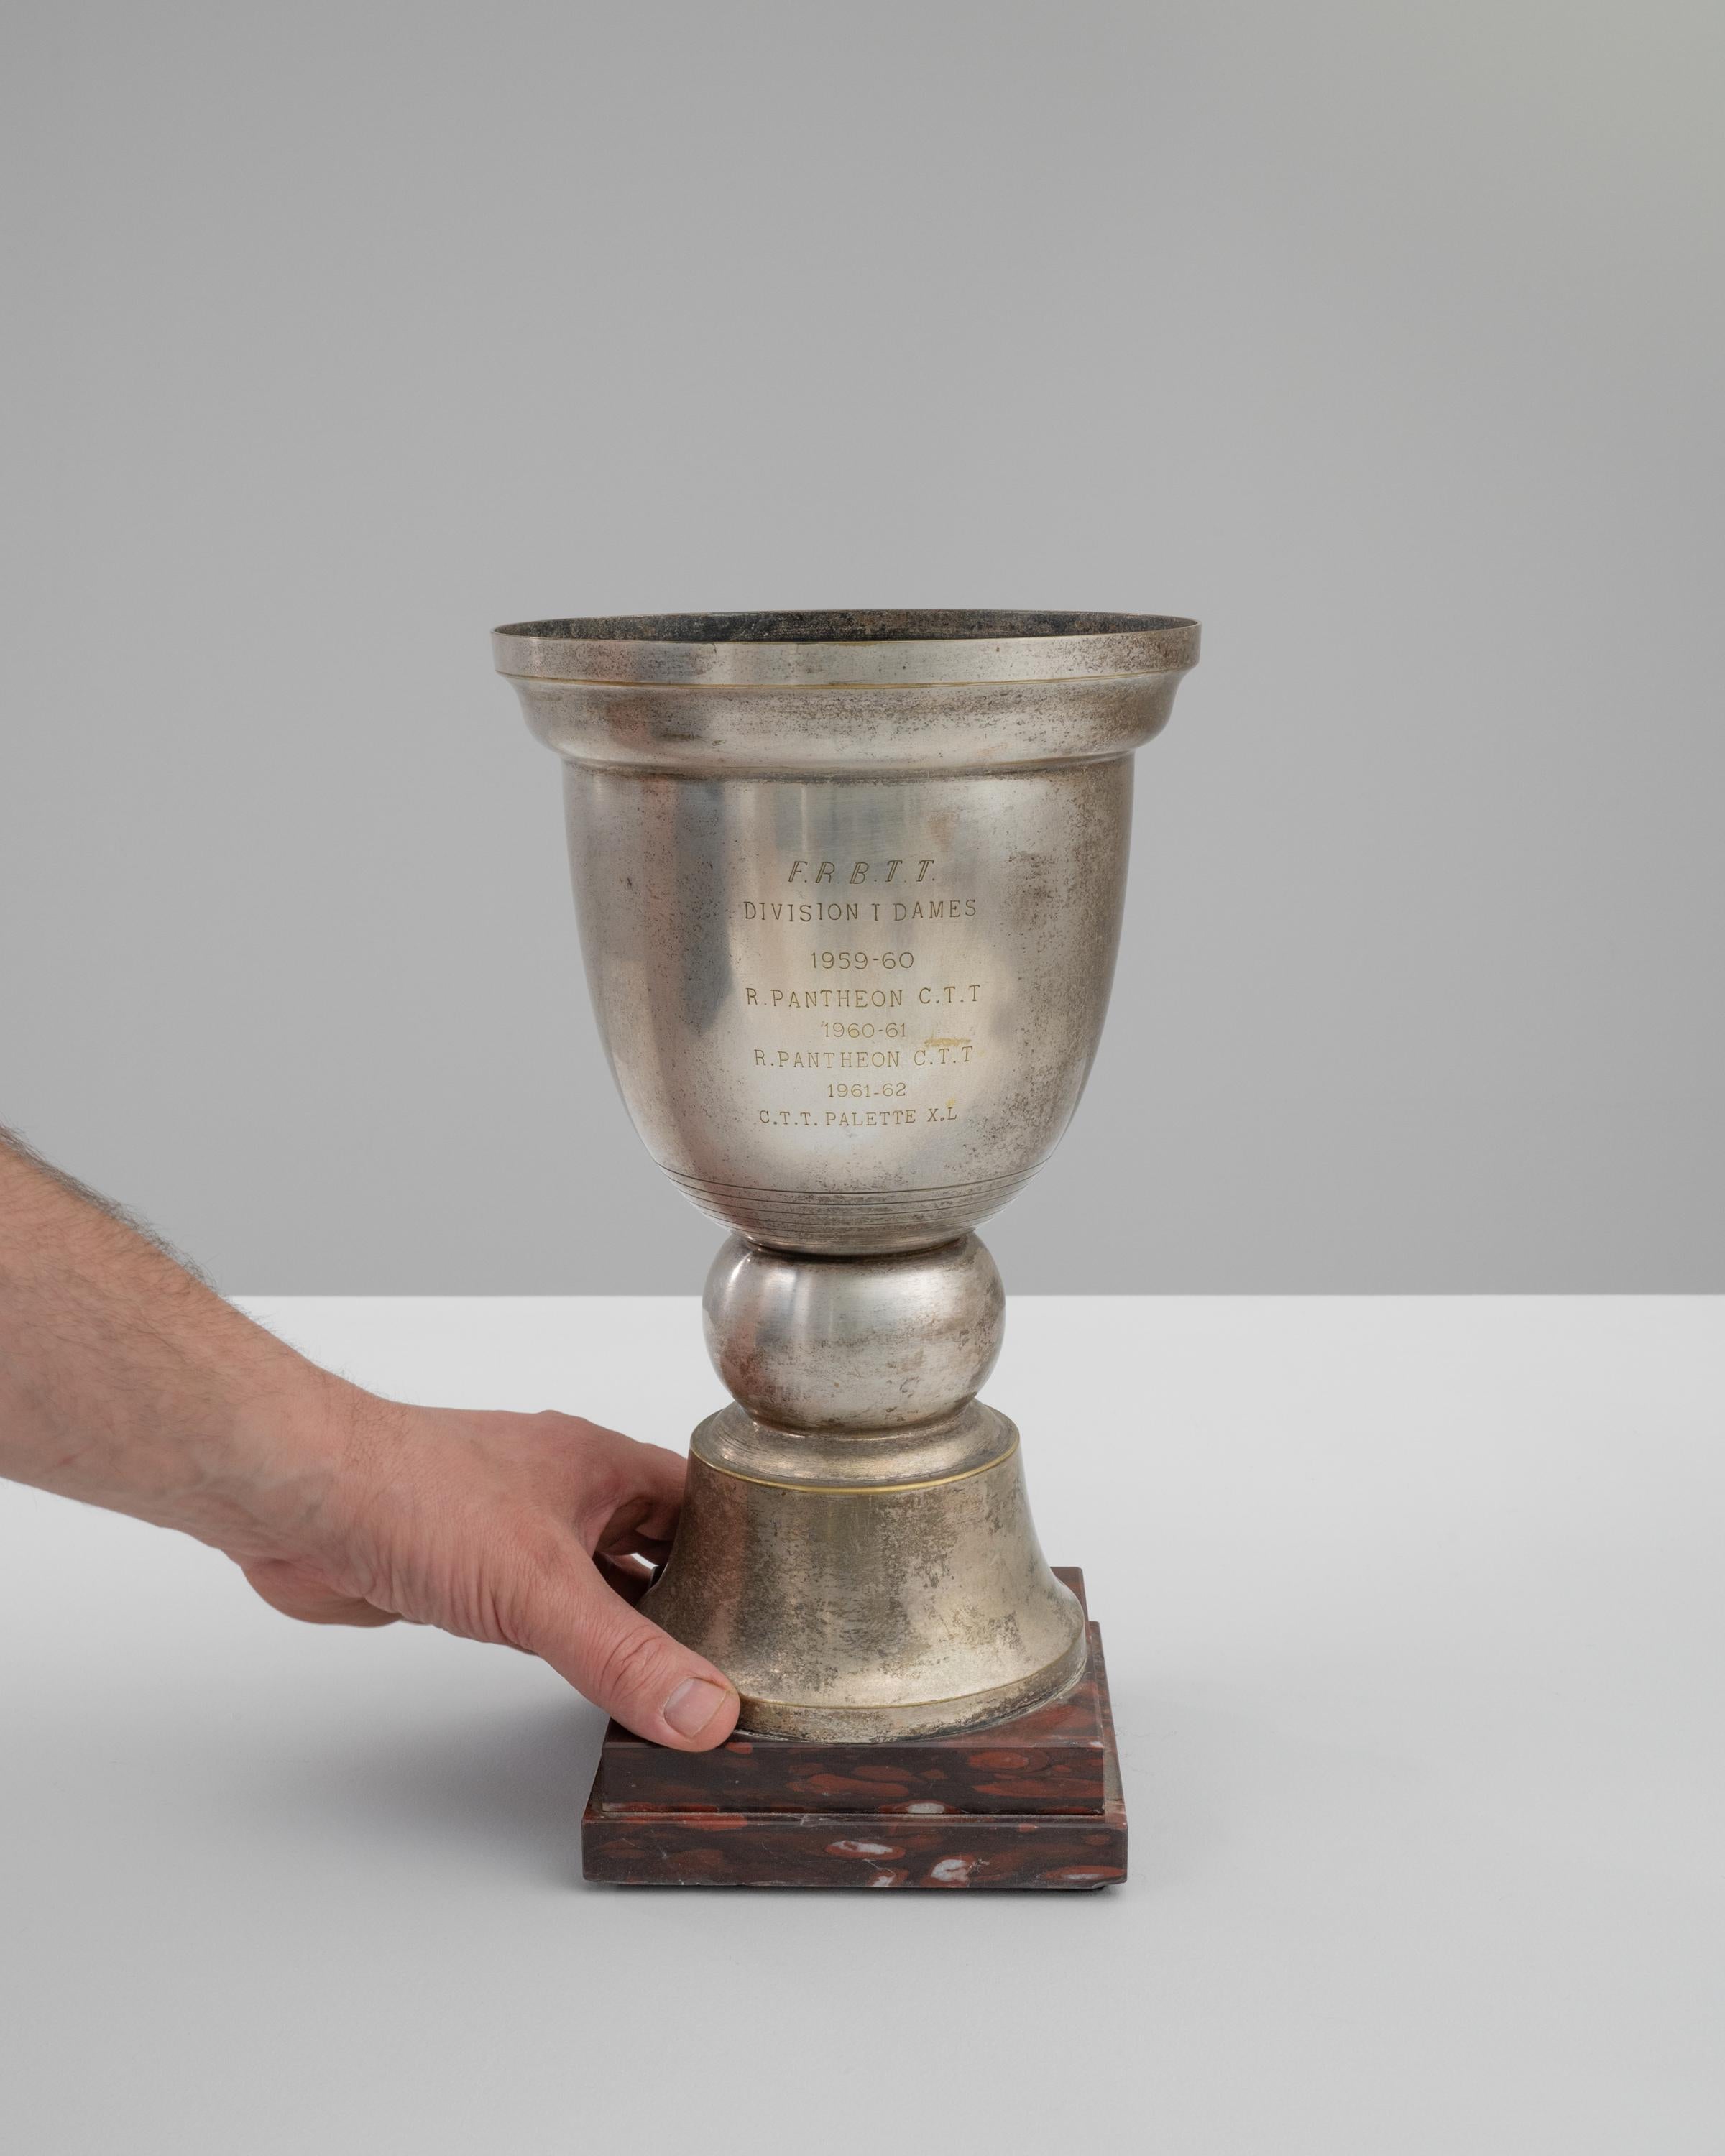 Step back in time with this magnificent 20th Century French Goblet Trophy, a true testament to athletic excellence and historic sporting events. Beautifully crafted from lustrous metal and mounted on an elegant marble base, this goblet commemorates